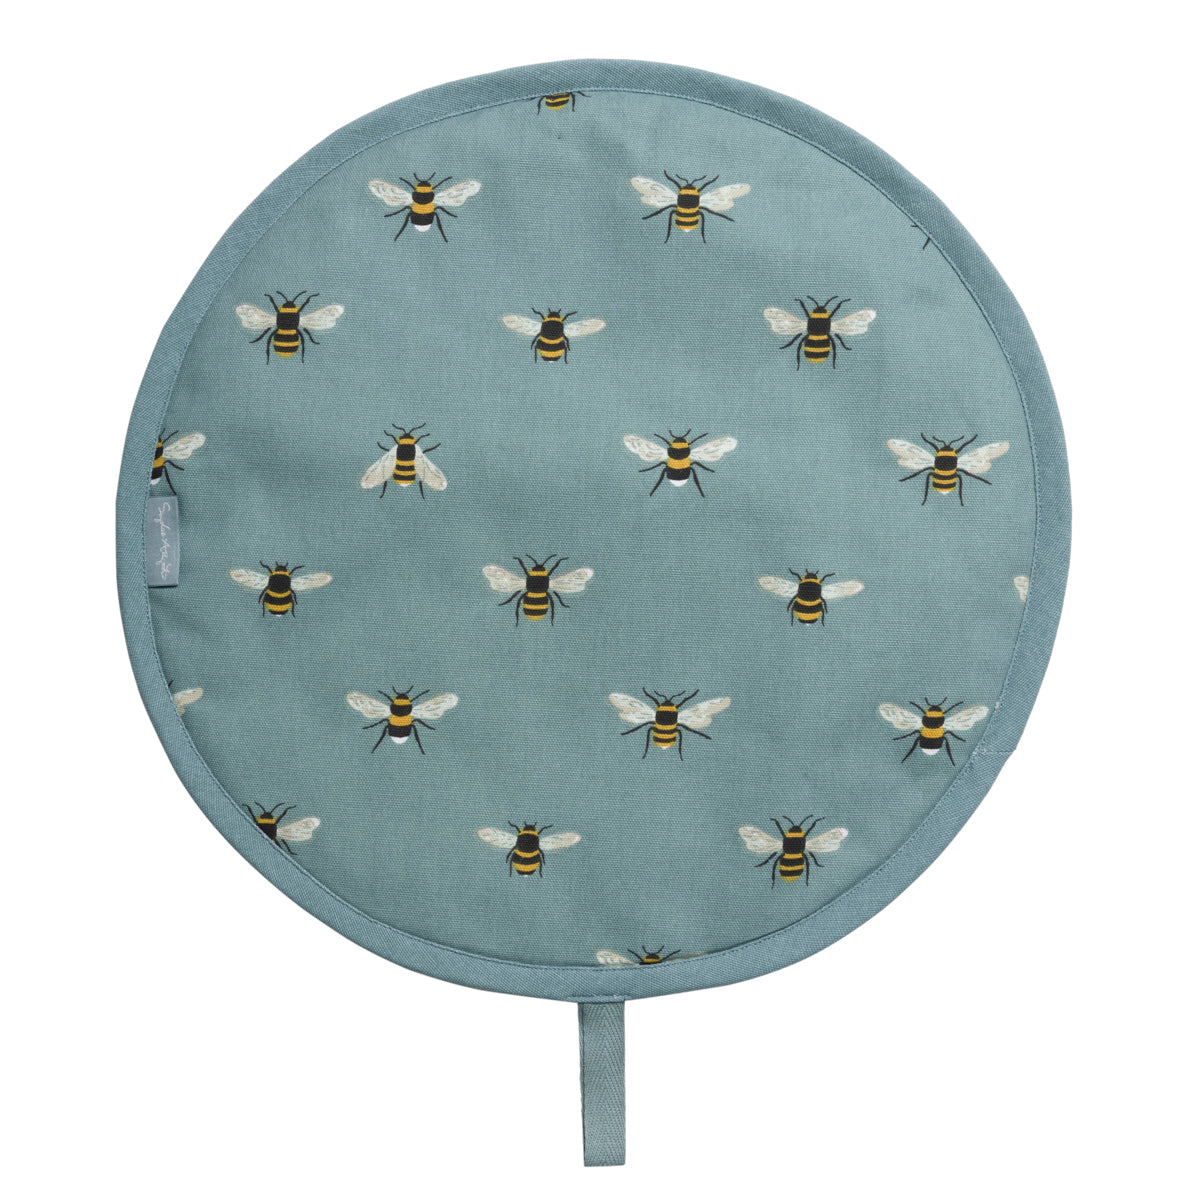 Bees Teal Circular Hob Cover by Sophie Allport